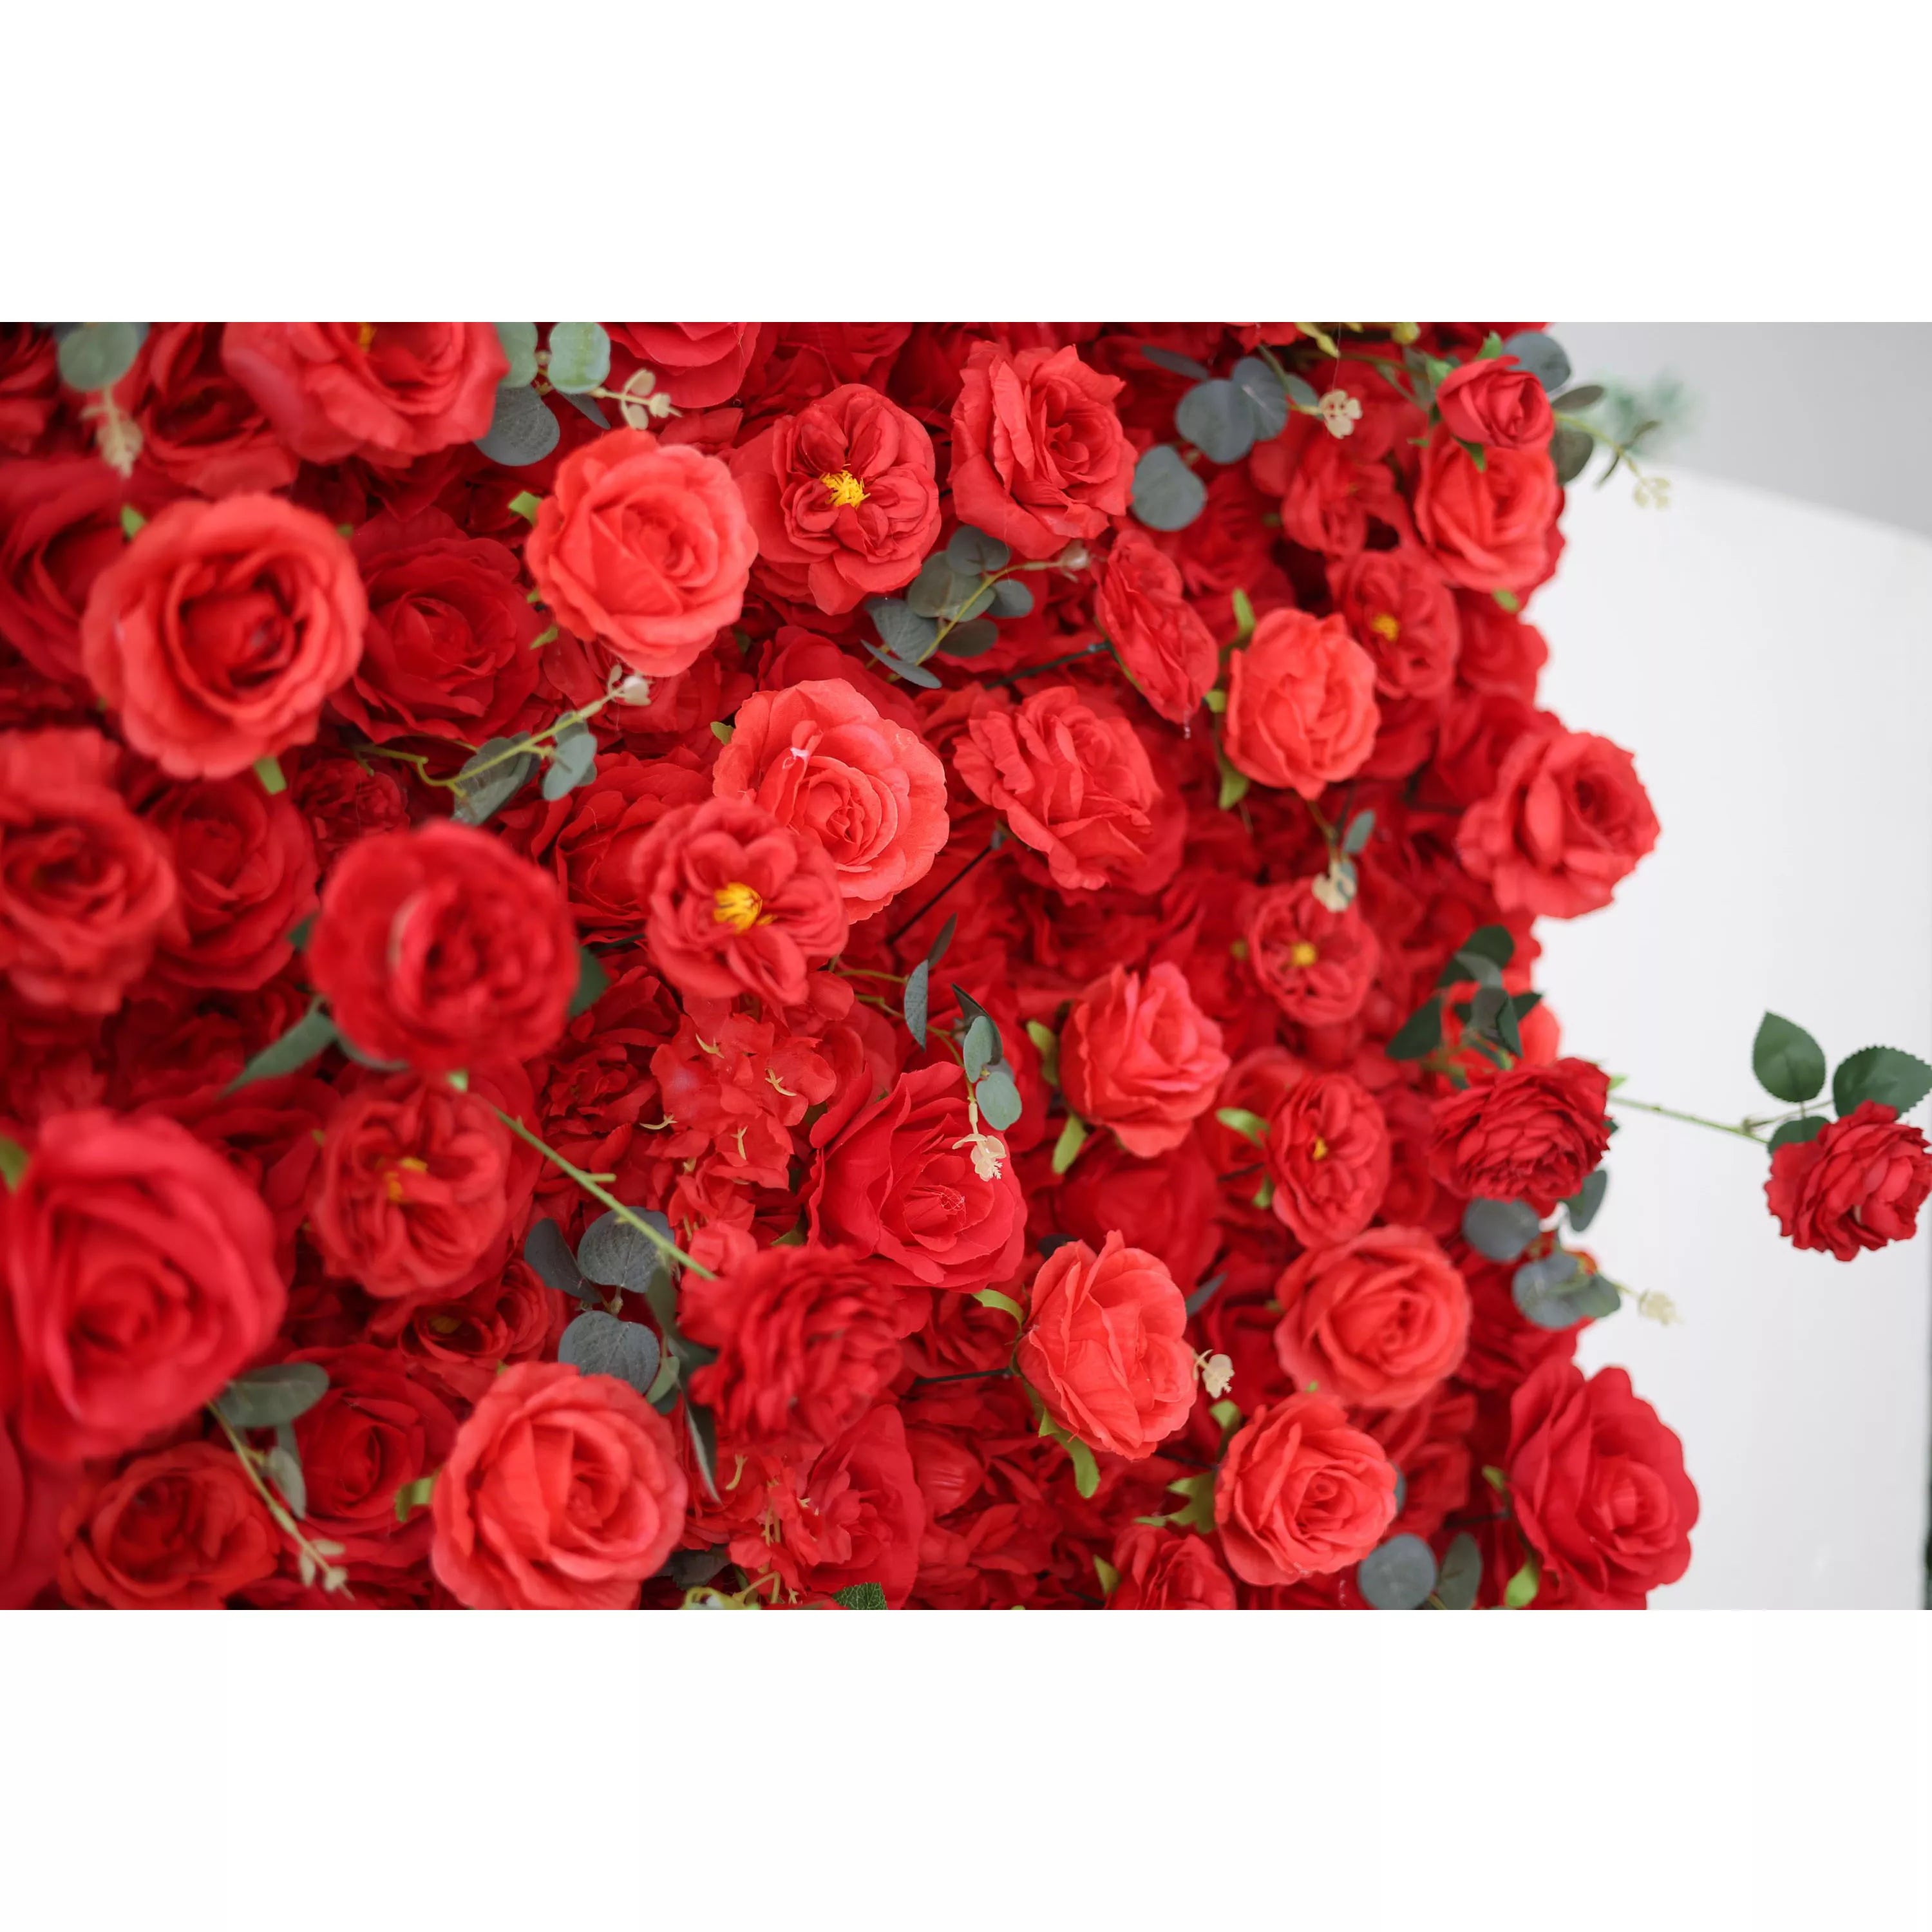 ValarFlowers Artificial Floral Wall Backdrop: The Red Rose Rapture - Passion Personified-VF-279